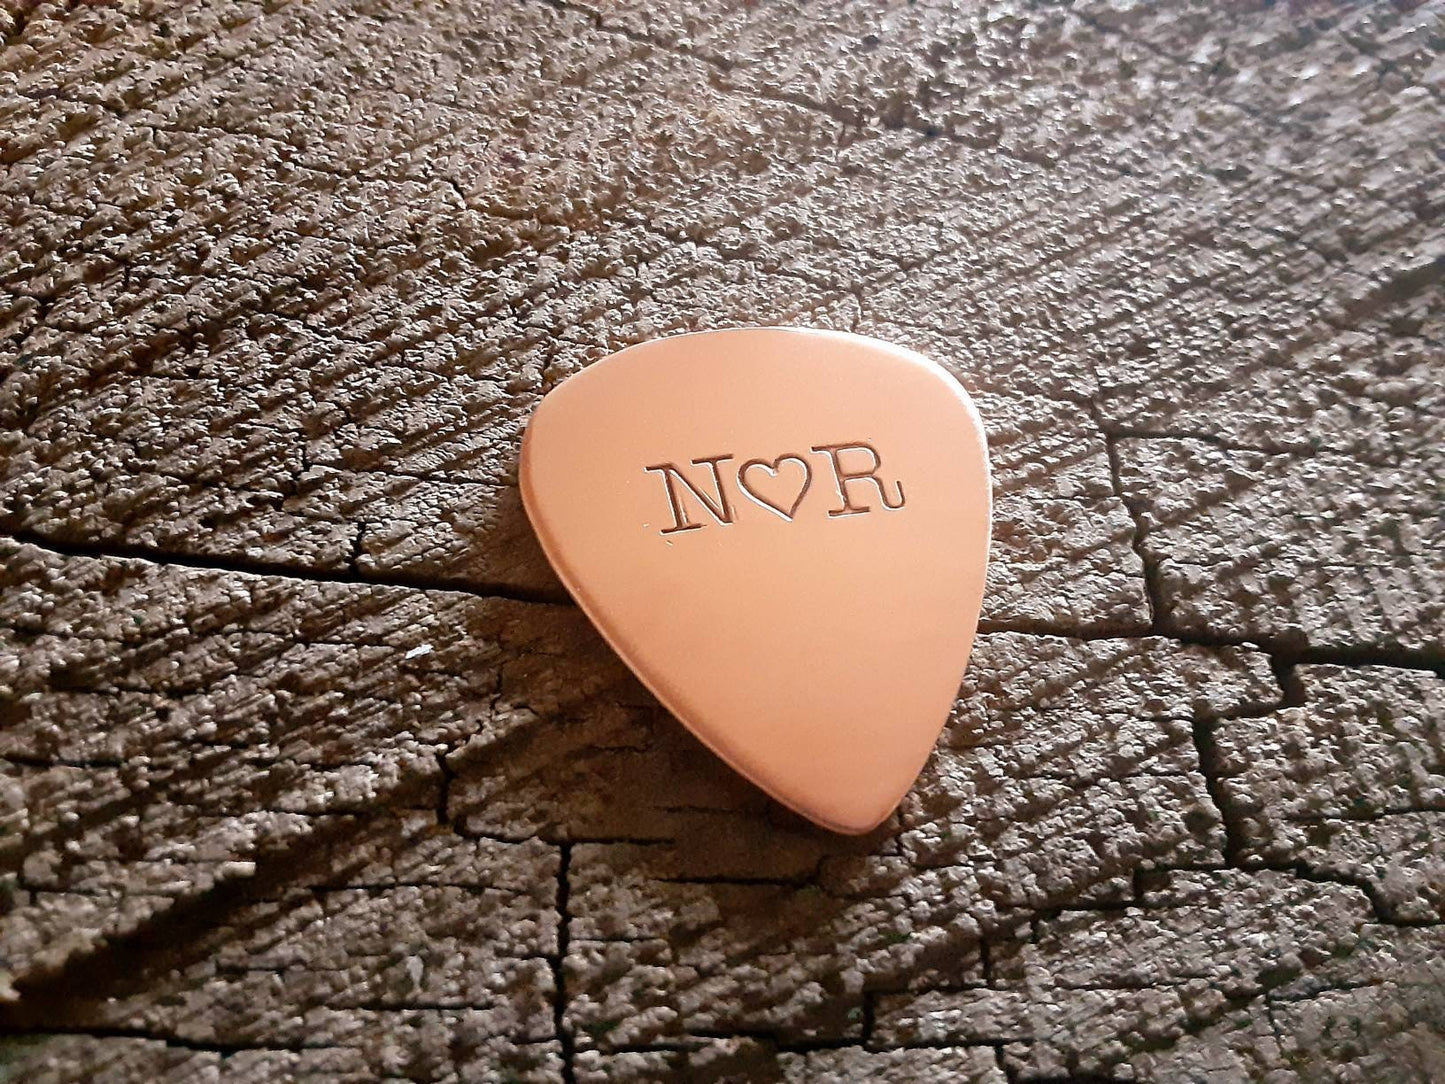 Initials and heart on a copper guitar pick